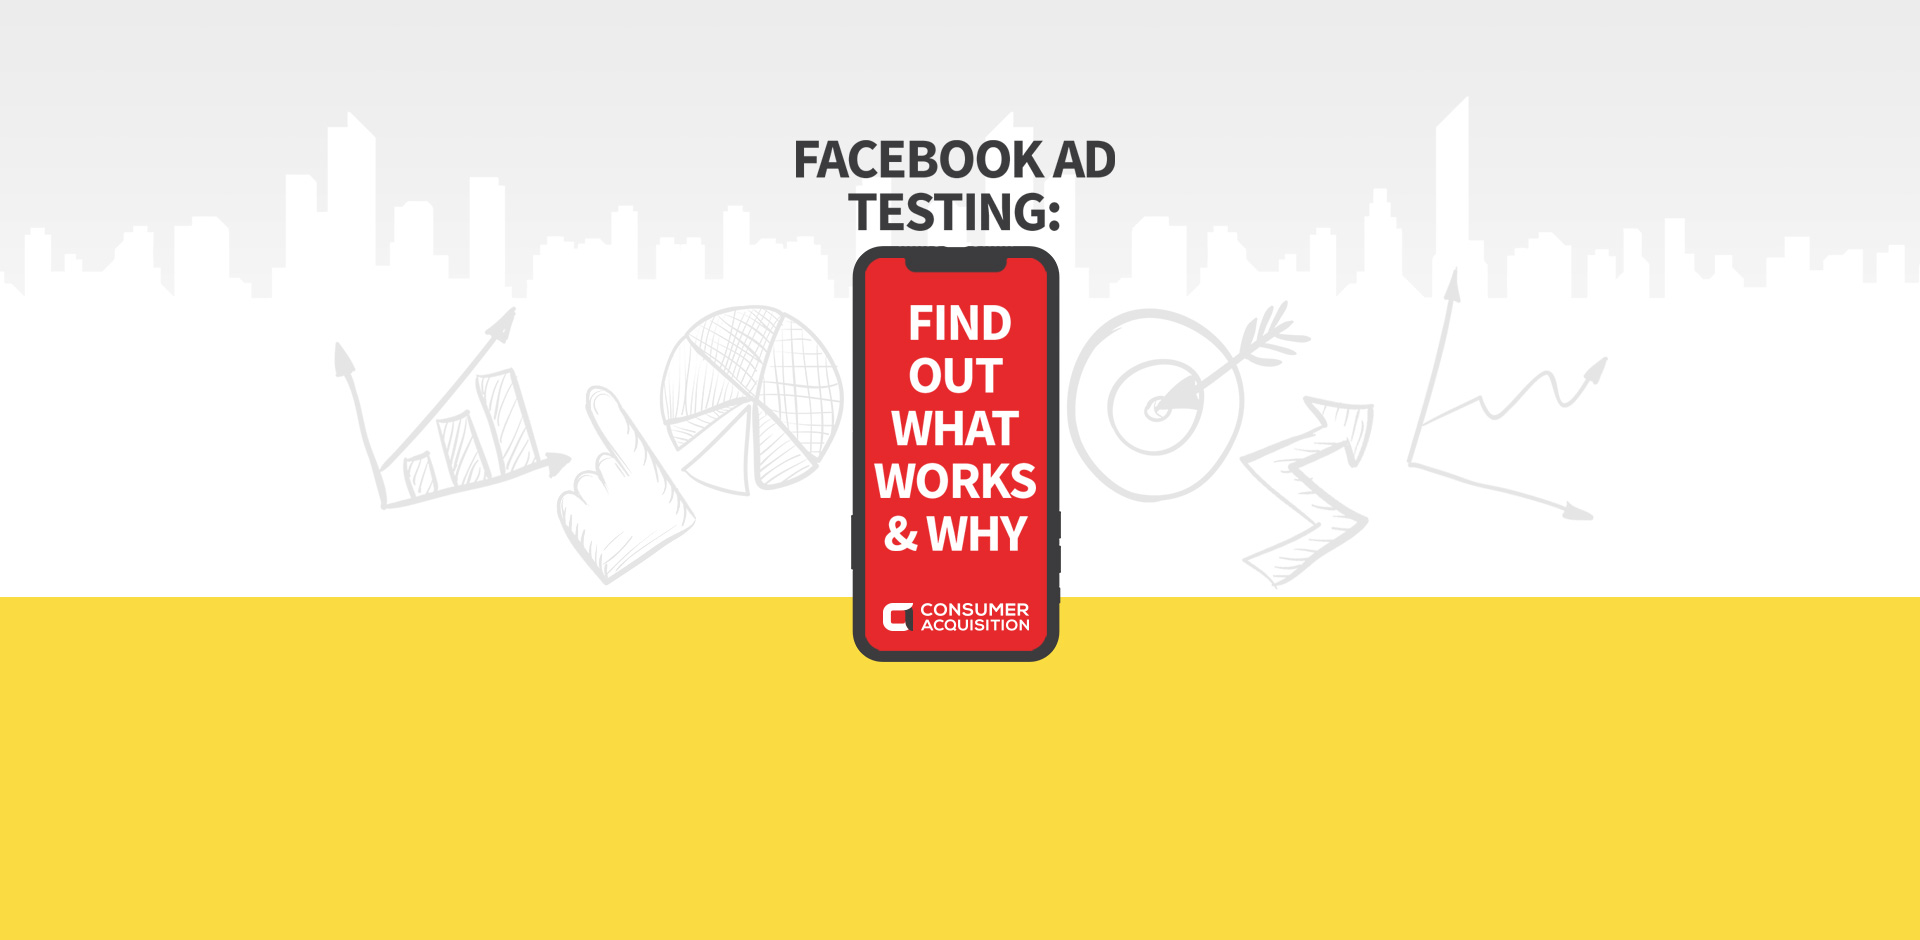 Facebook Ads Tested: Find Out What Works & Why